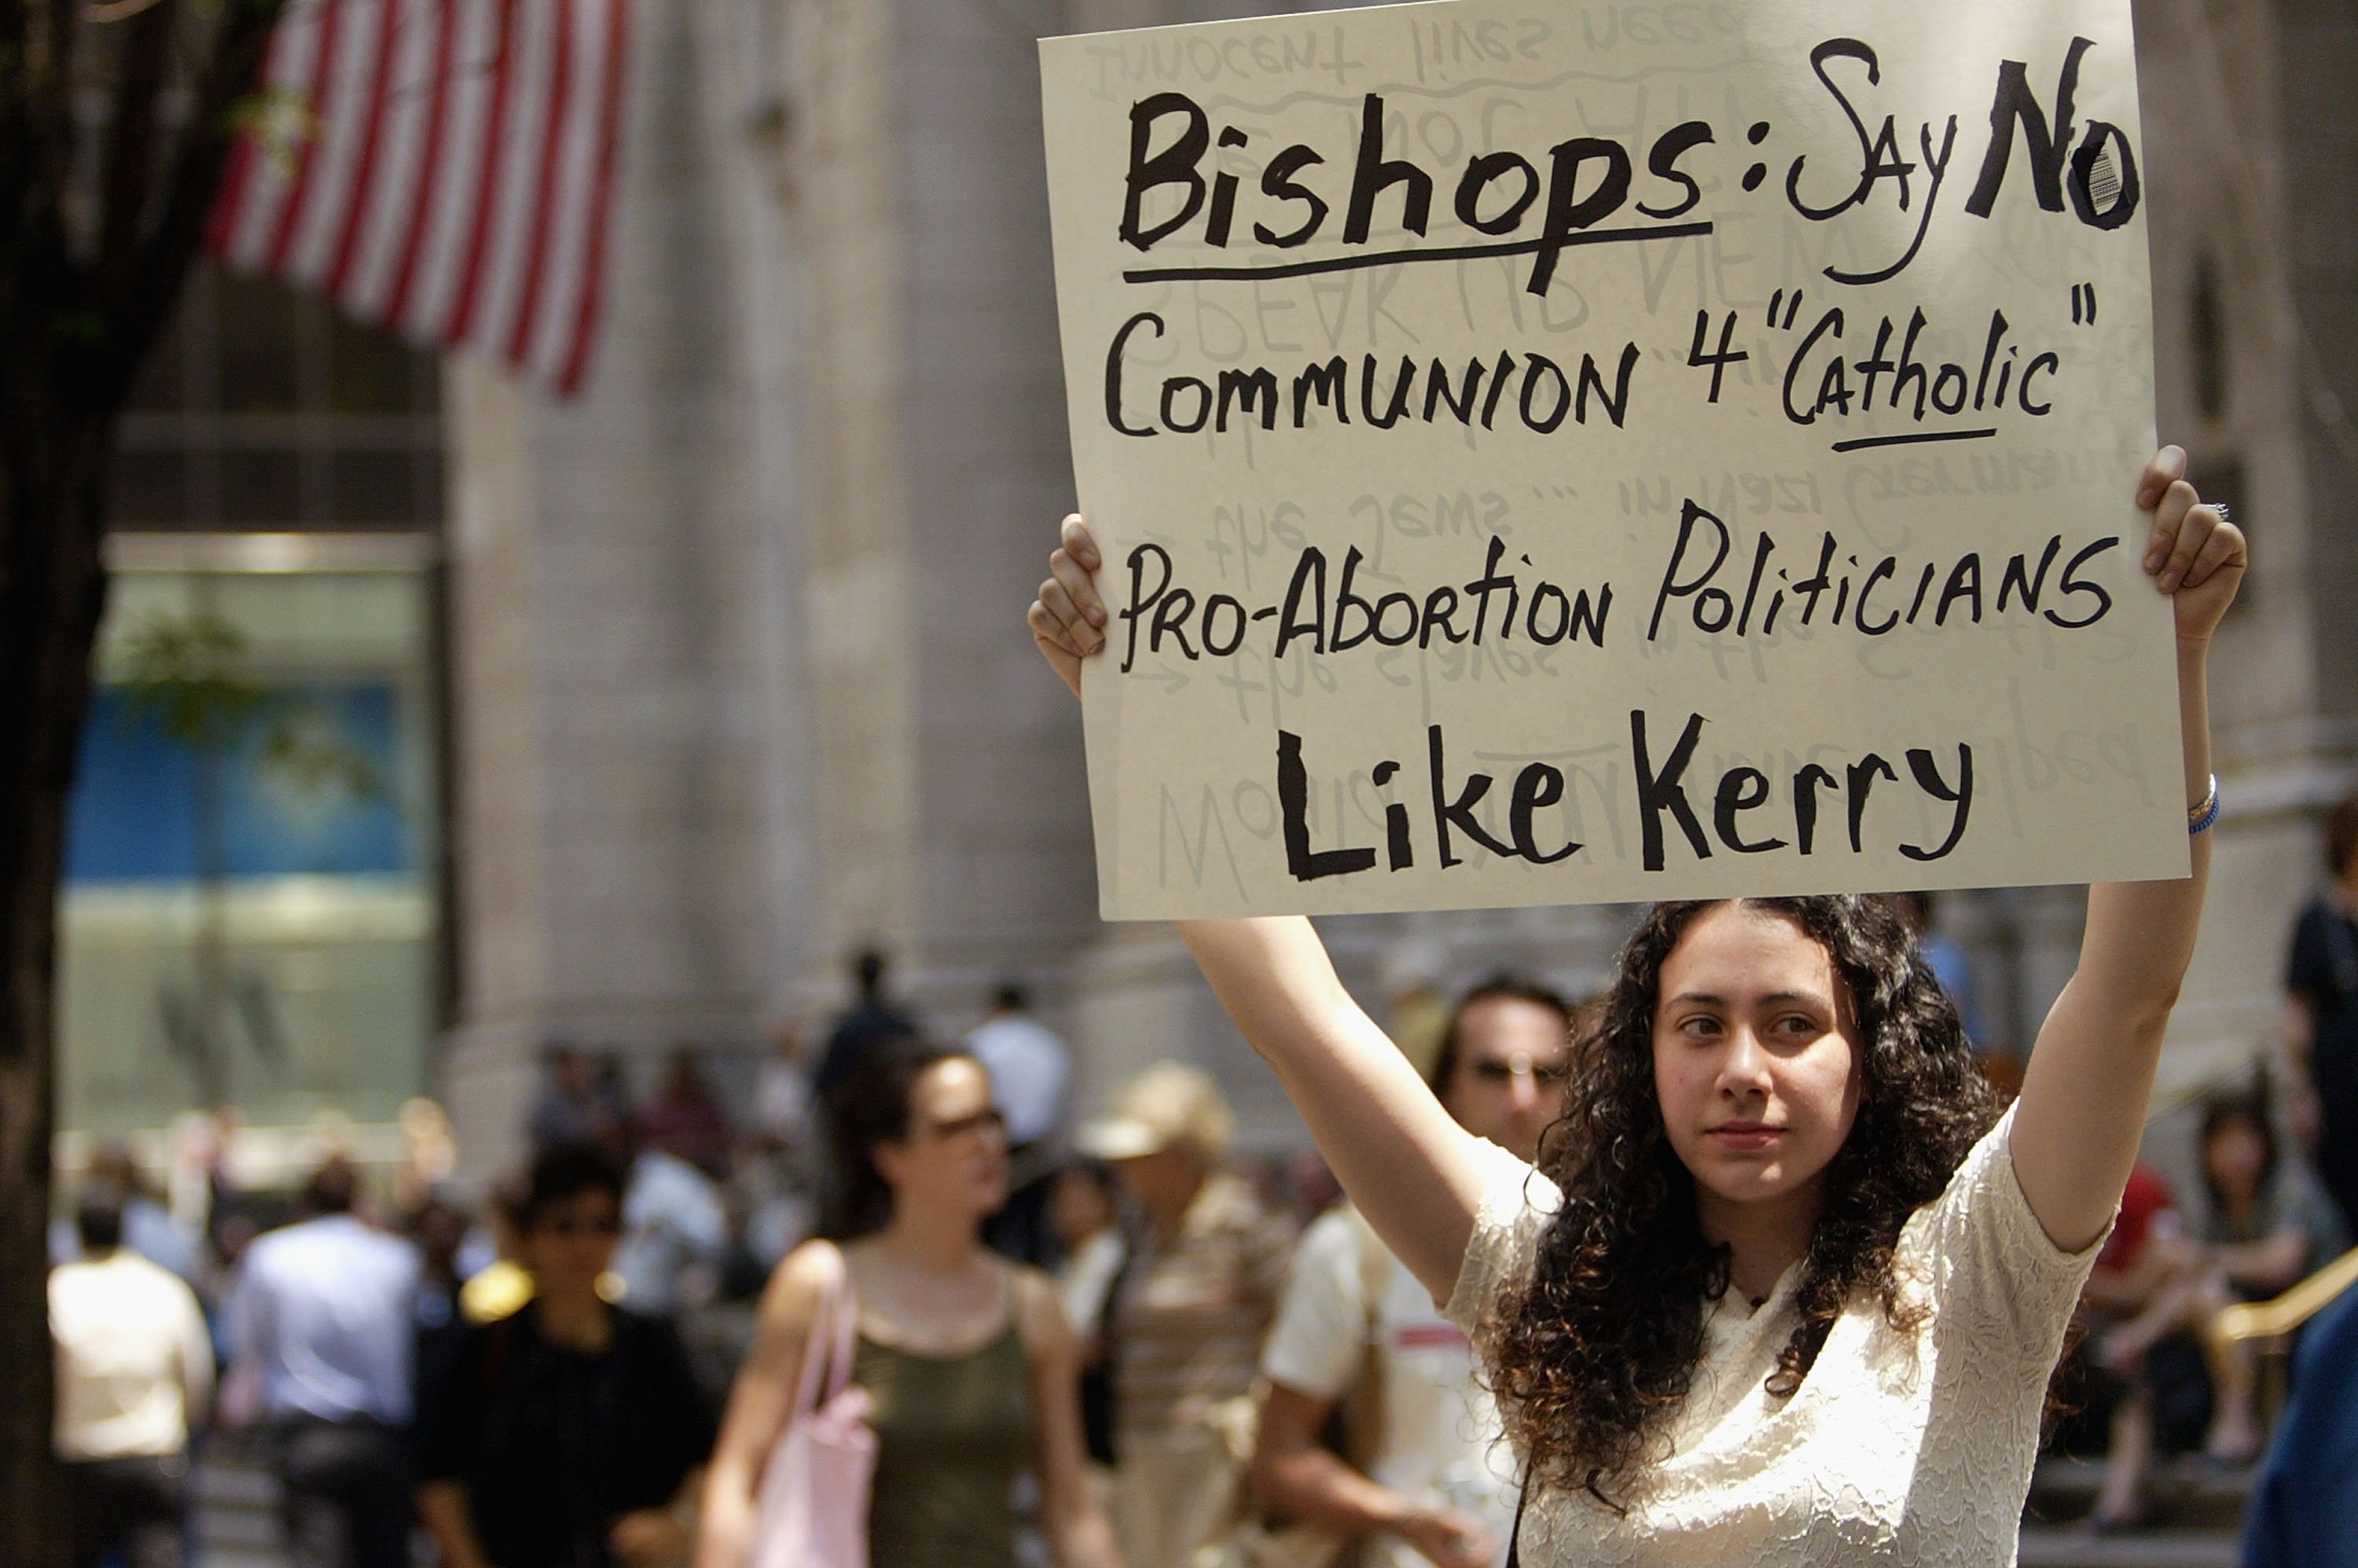 NEW YORK - JUNE 16: Jenni Logan holds up a sign urging presumptive Democratic presidential nominee John Kerry to be denied Holy Communion in front of St. Patrick's Cathedral June16, 2004 in New York City. Some bishops around the country are urging Kerry, a pro-choice Catholic, and other pro-choice Catholic politicians to abstain voluntarily from taking Communion. (Photo by Spencer Platt/Getty Images)